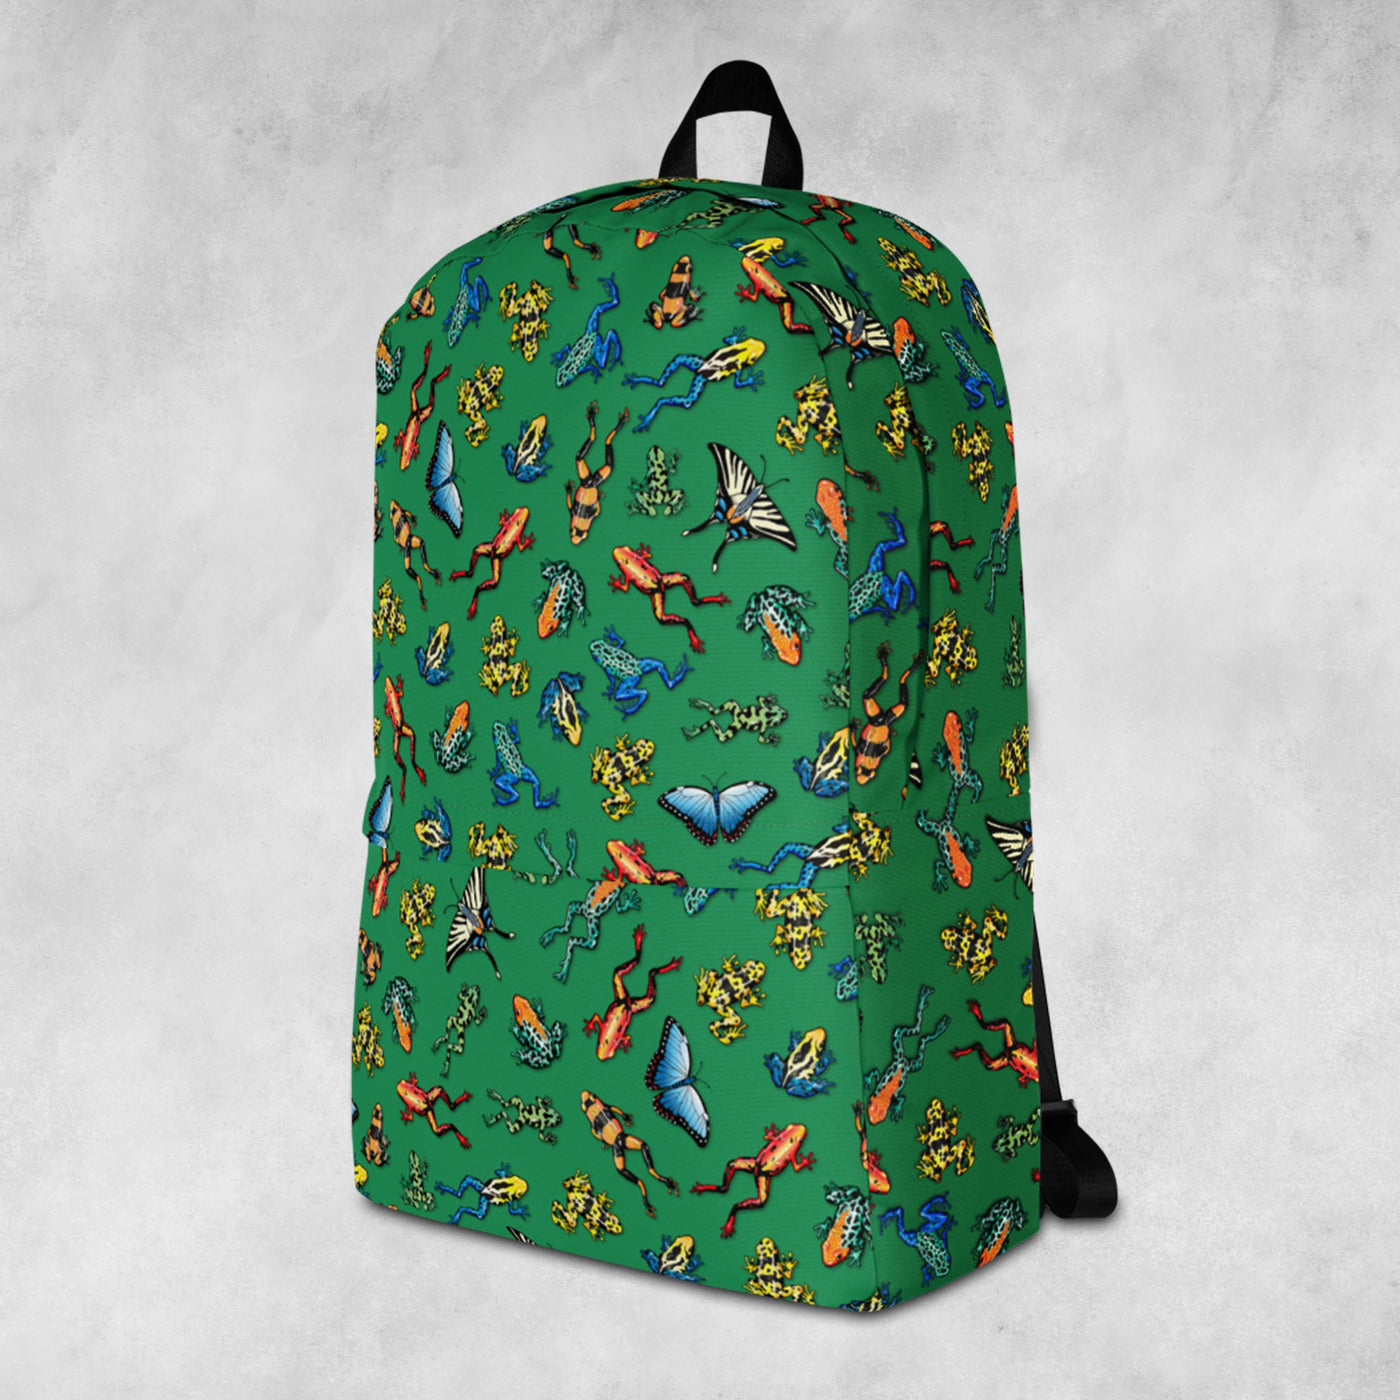 Poison Arrow Frogs - Kids Back Pack